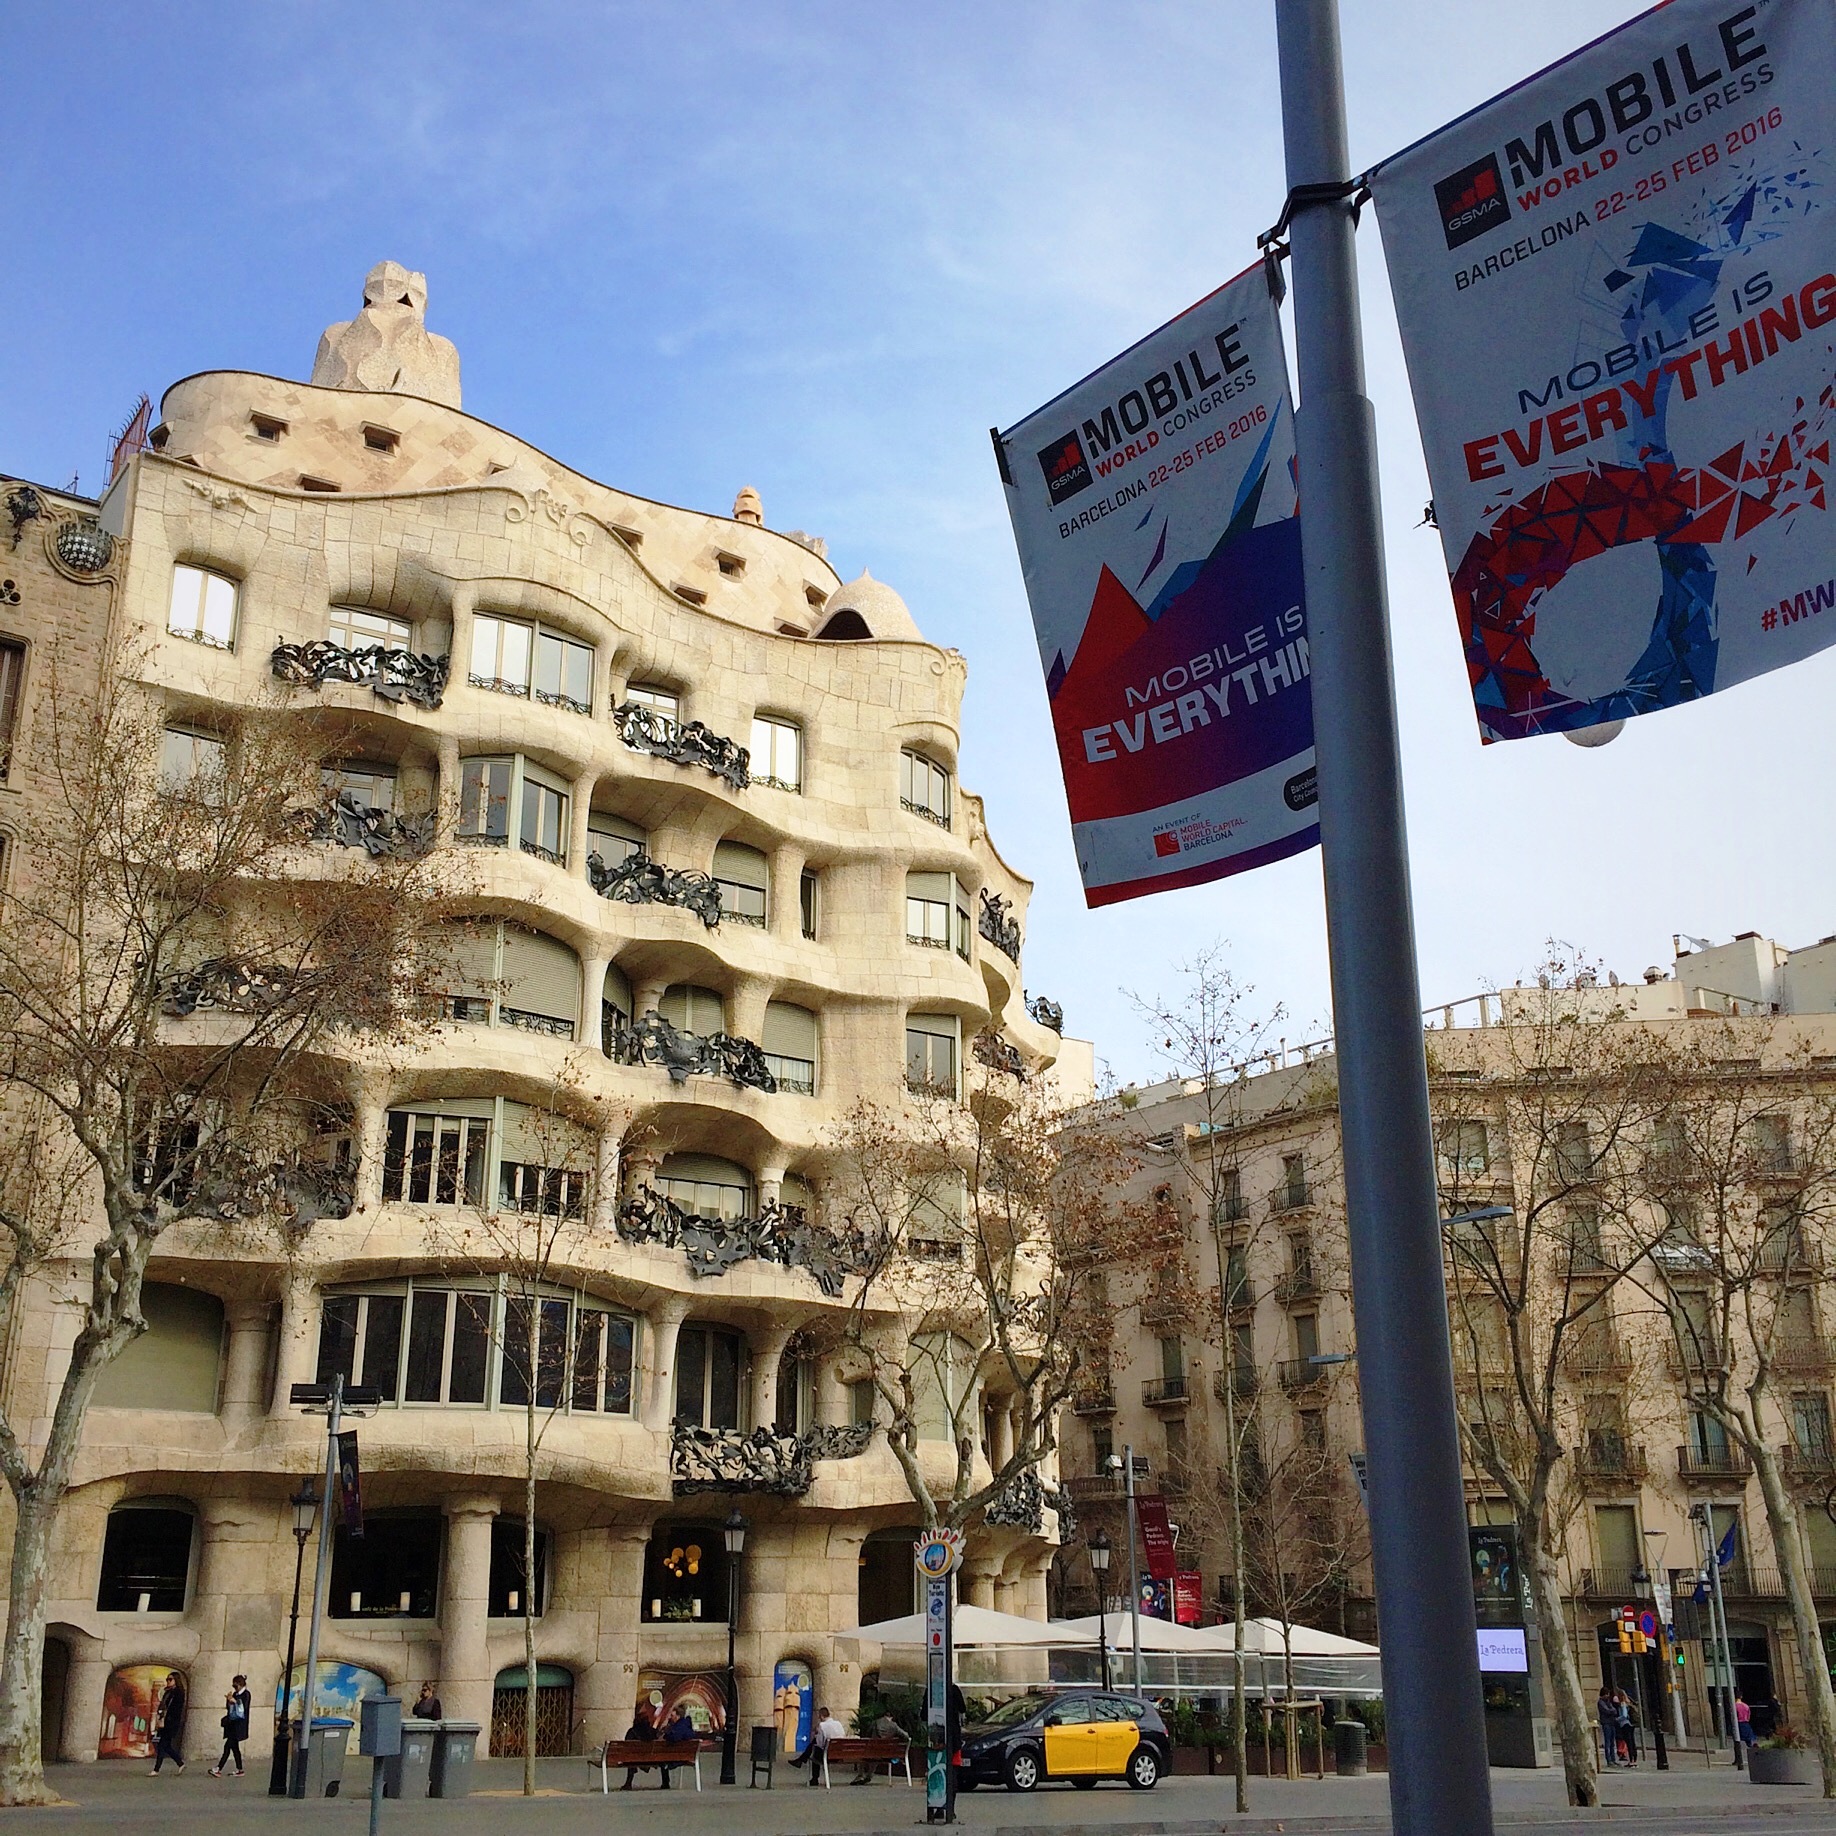 Mobile World Congress occupies Barcelona for nearly a full week each year.